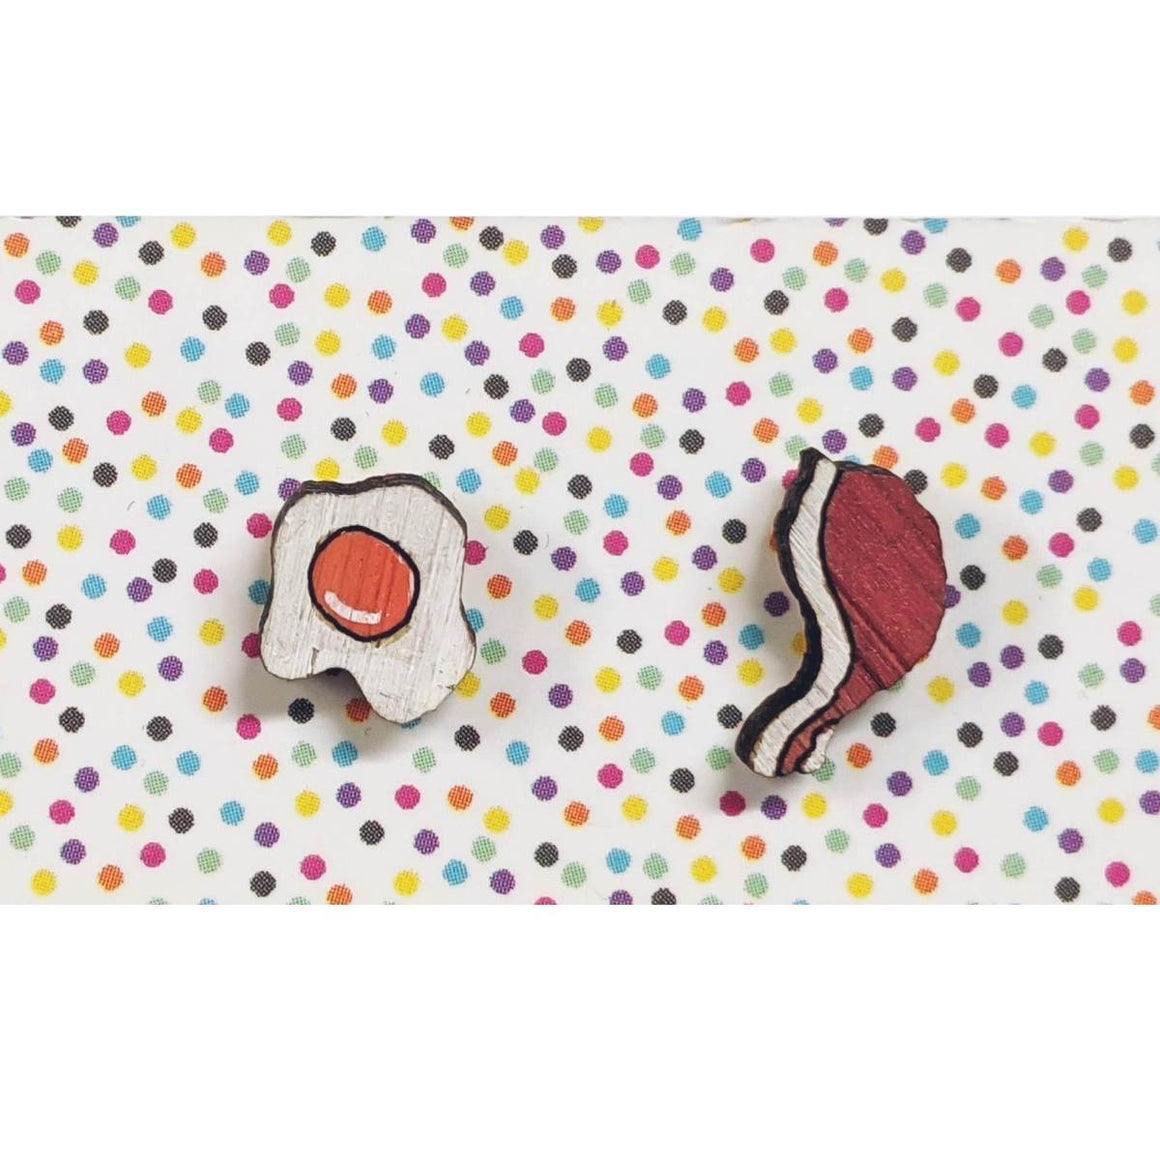 A pair of intricately hand coloured studs one in the form of a fried egg, the other a rasher of bacon. Shown on a rainbow polka dot background.